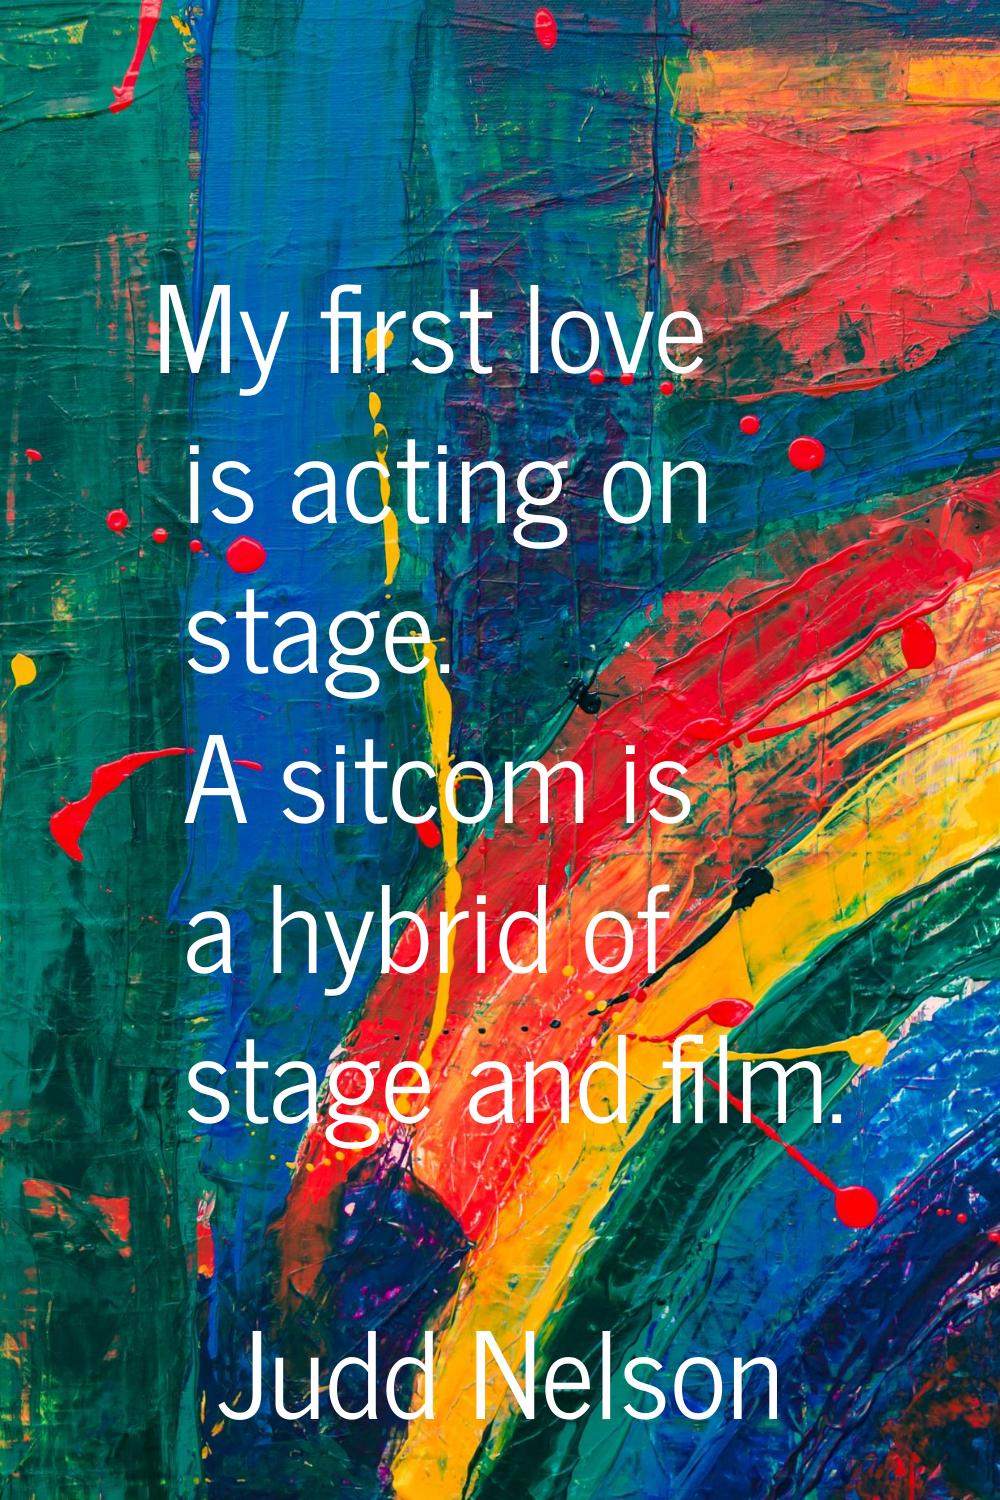 My first love is acting on stage. A sitcom is a hybrid of stage and film.